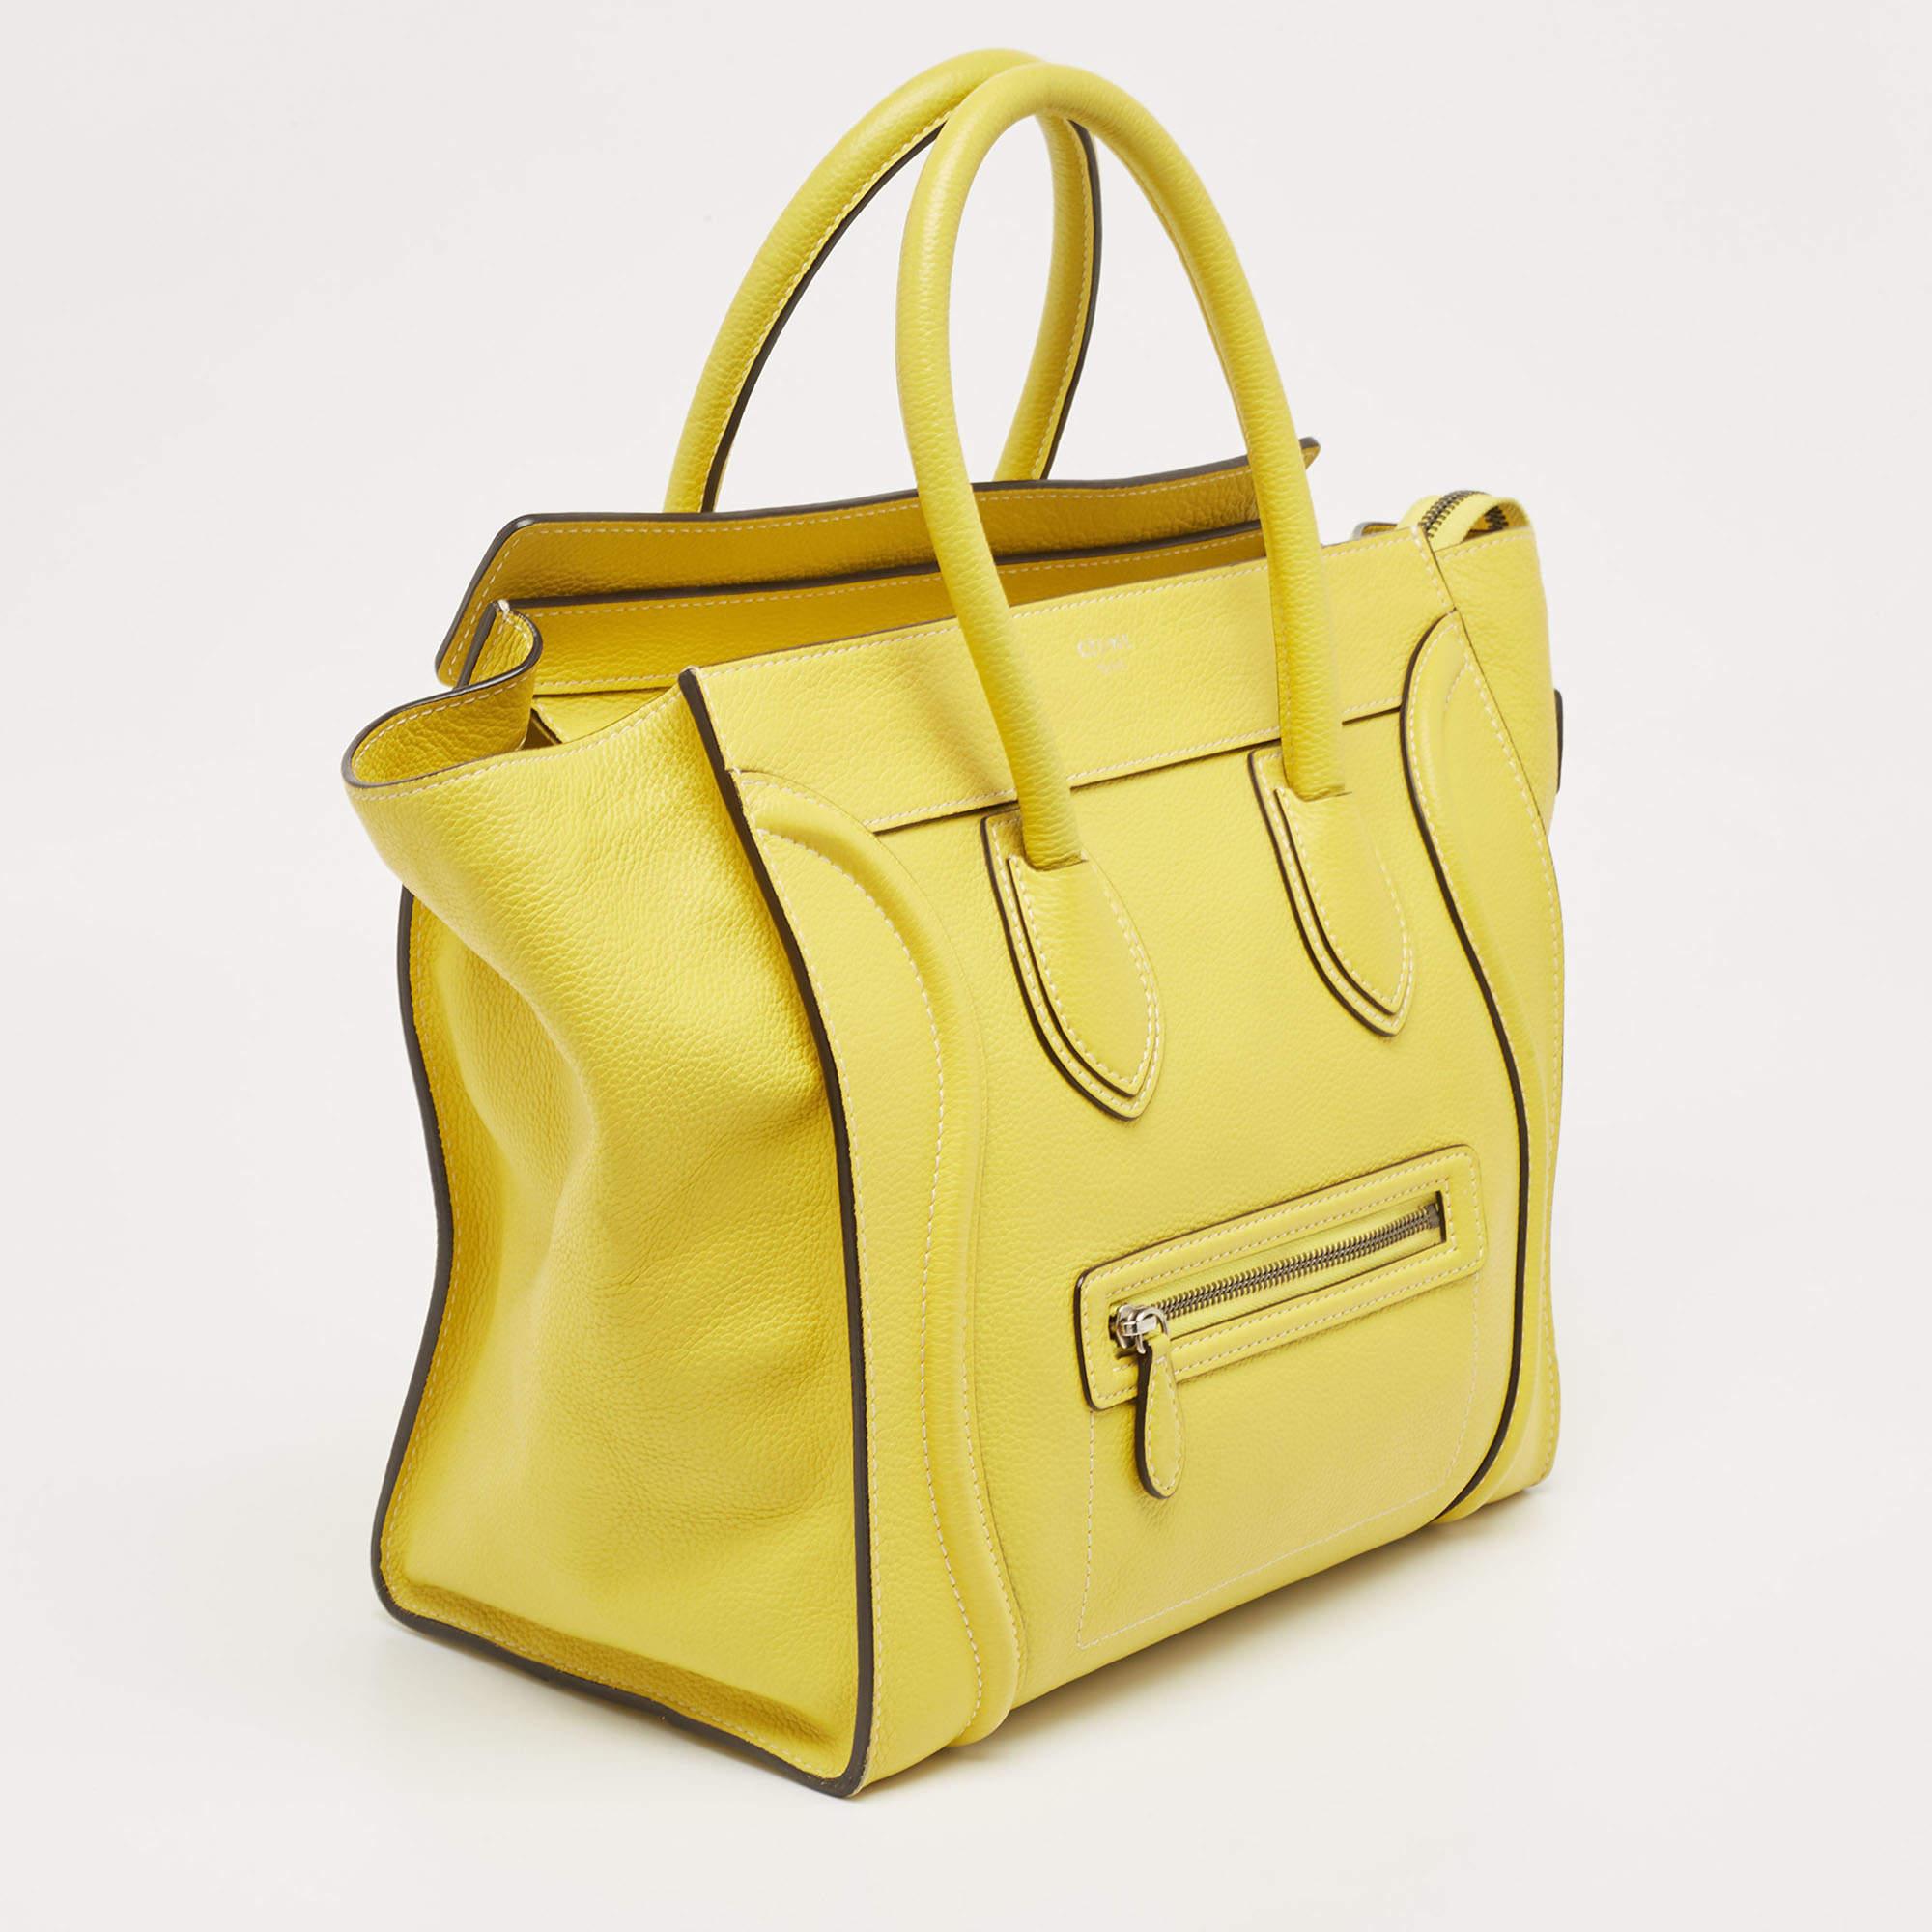 Celine Yellow Leather Mini Luggage Tote For Sale 6